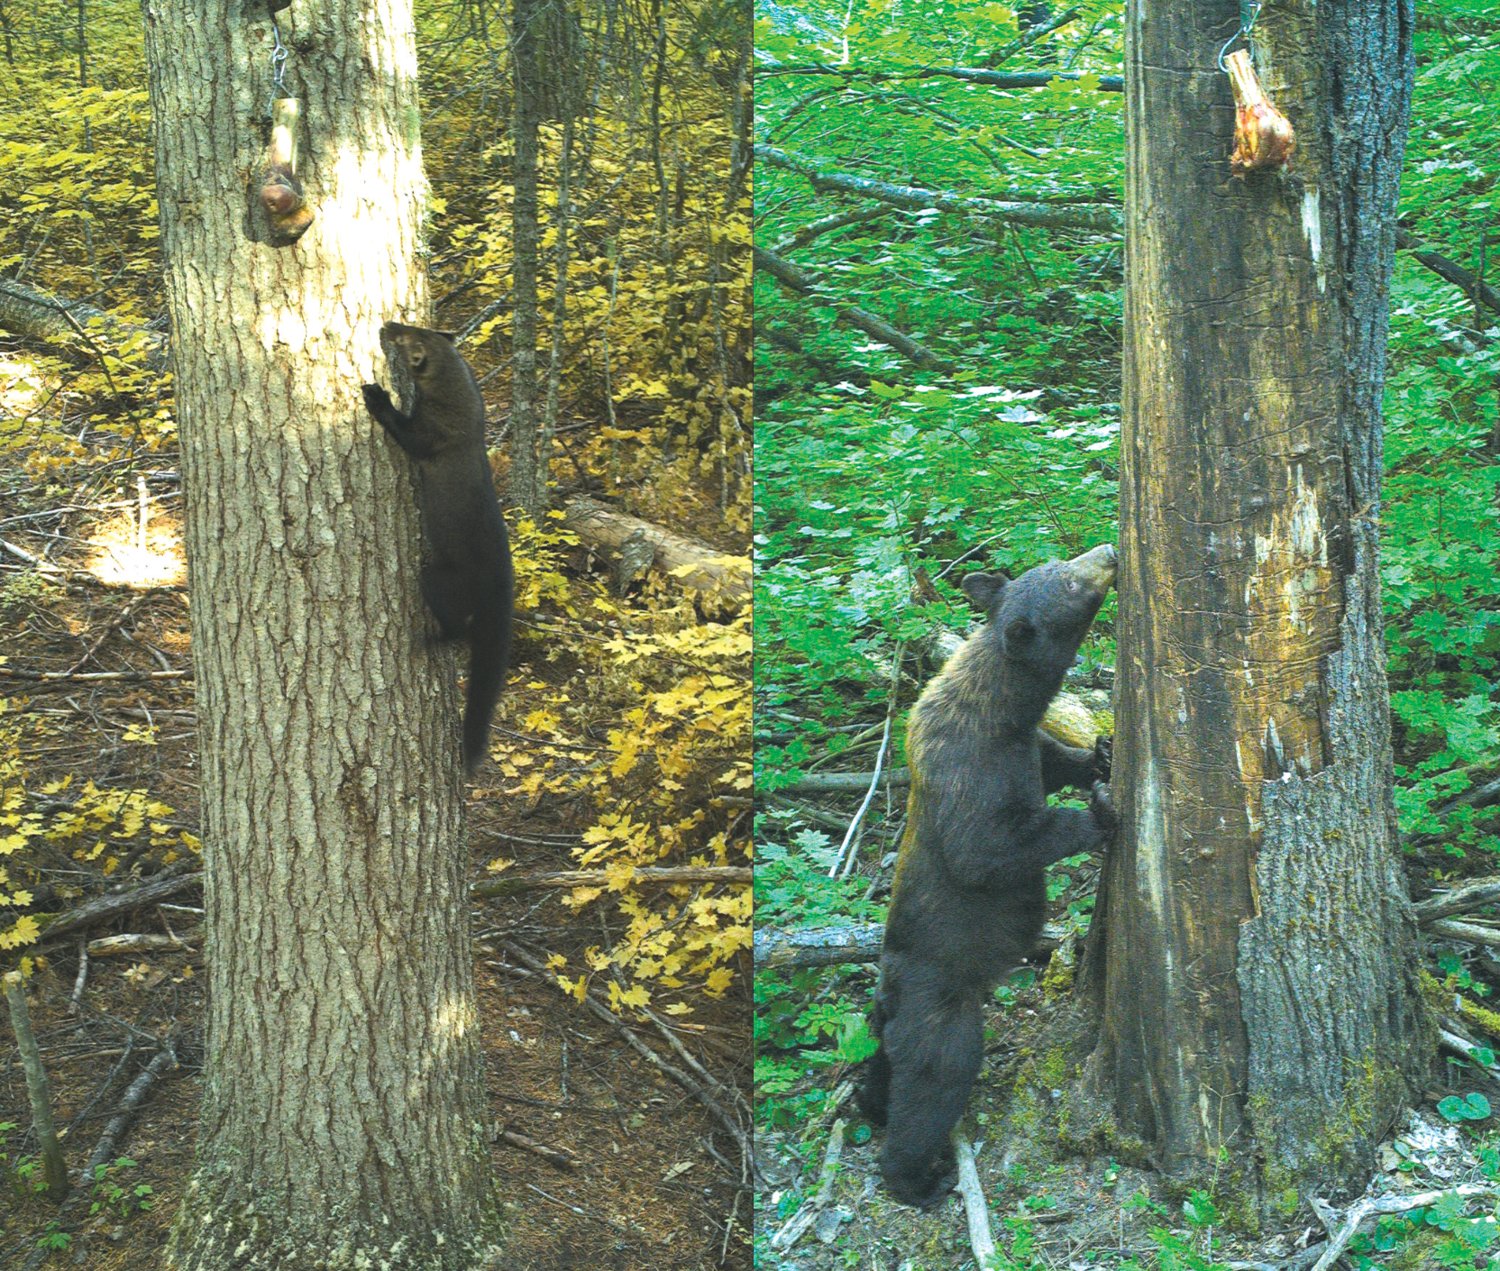 A fisher and a black bear are pictured in two images from remote camera stations in the Gifford Pinchot National Forest.